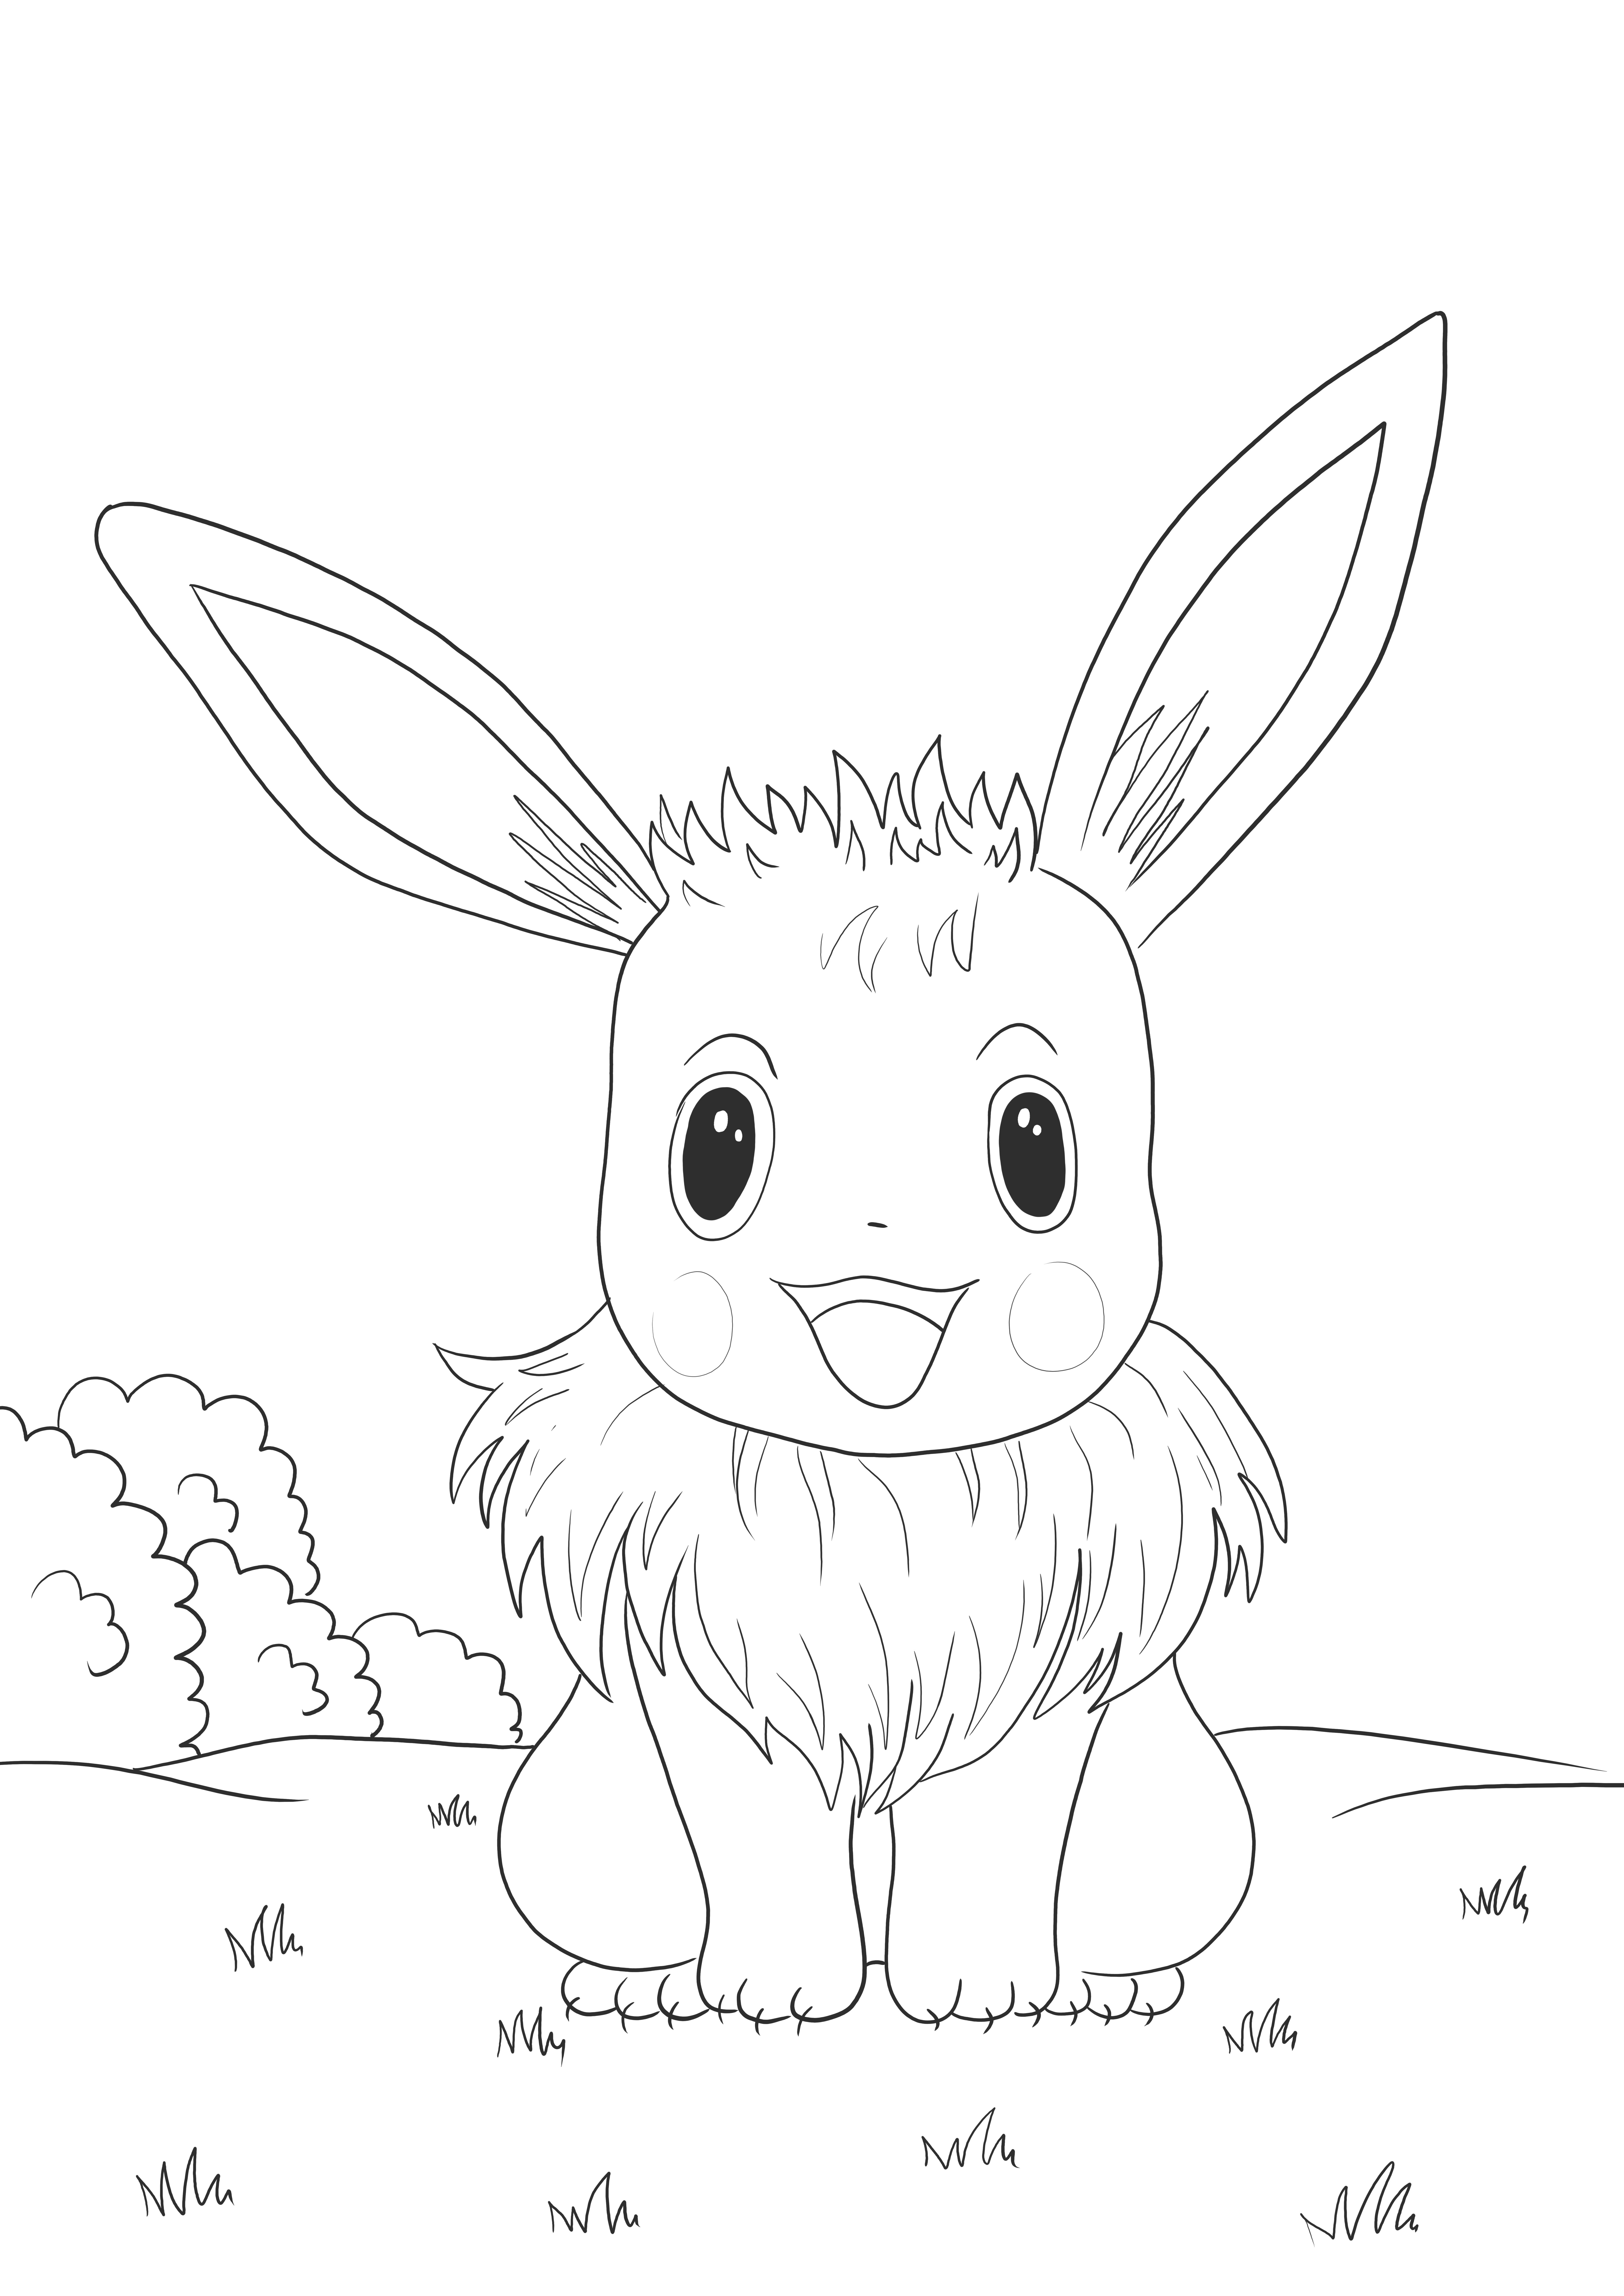 Eevee Pokémon smiling face free to print and color image